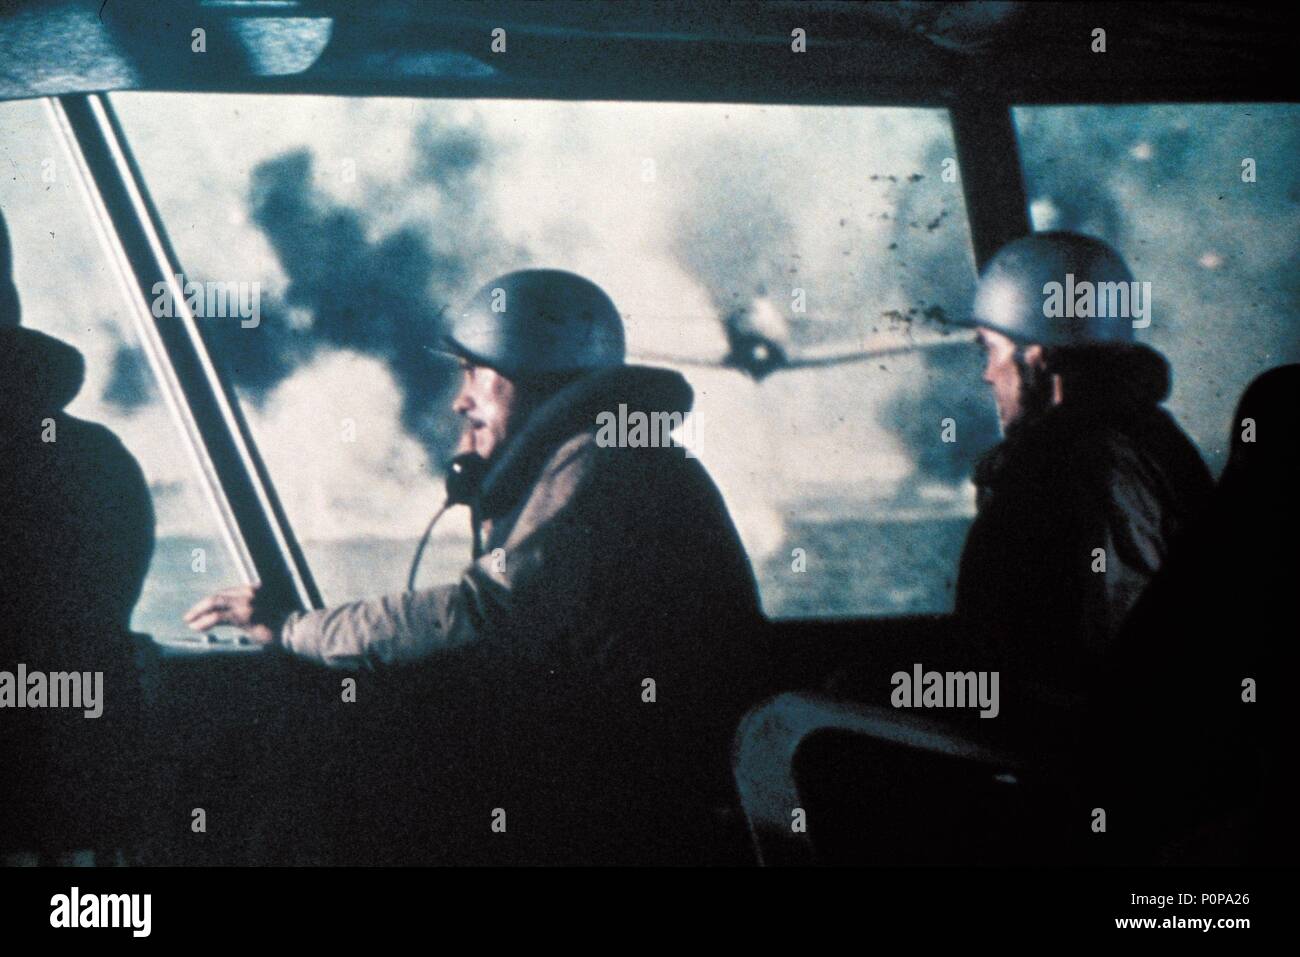 Original Film Title: MIDWAY.  English Title: MIDWAY.  Film Director: JACK SMIGHT.  Year: 1976.  Stars: HENRY FONDA. Credit: UNIVERSAL PICTURES / Album Stock Photo